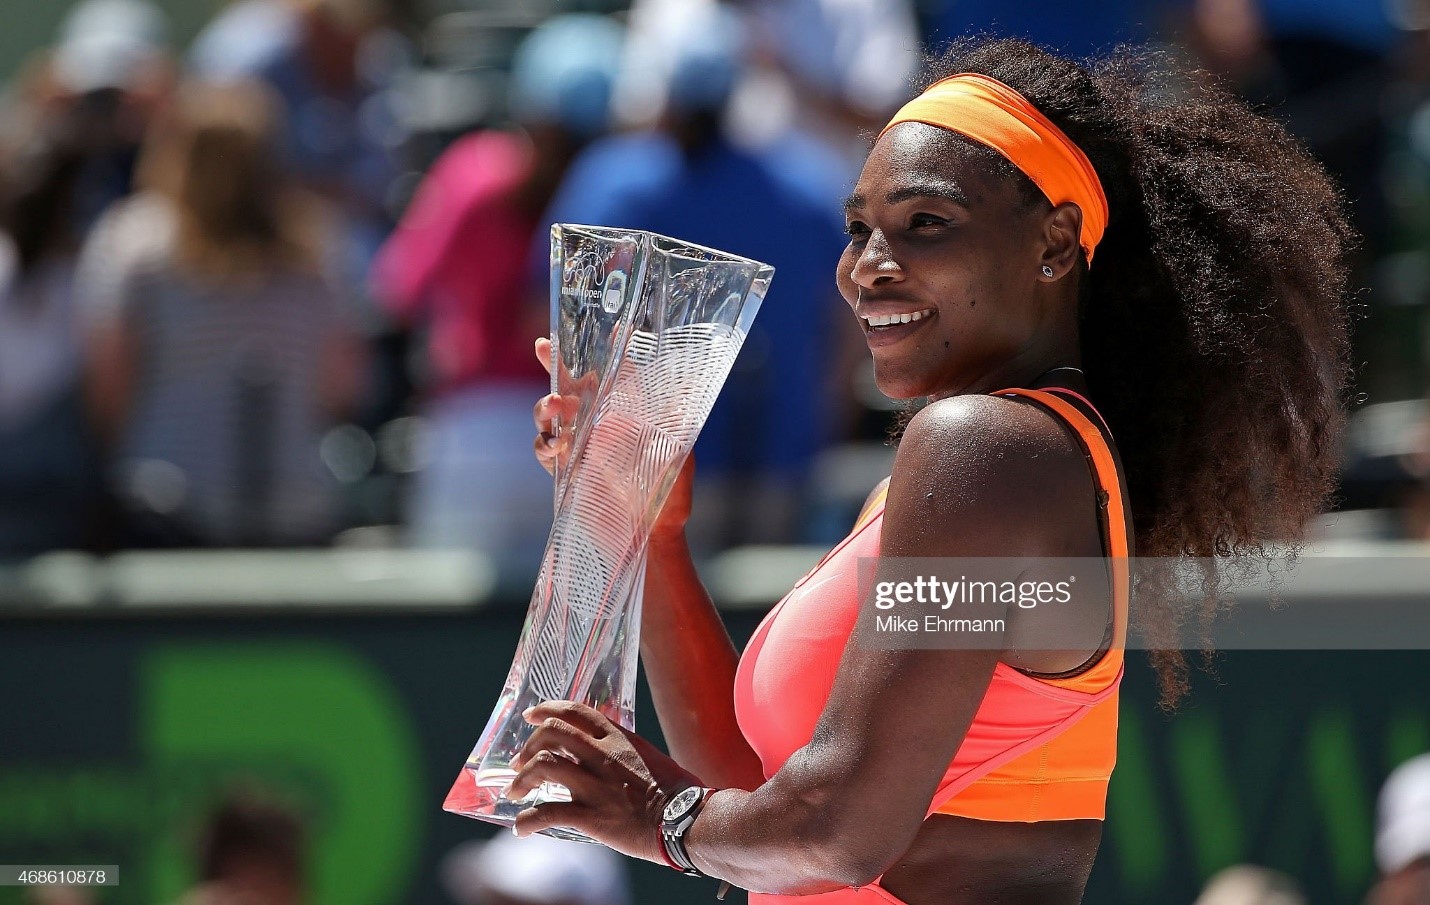 Serena Williams poses with the trophy after winning the Women's Final of the Miami Open against Carla Suarez Navarro of Spain during day 13 at Crandon Park Tennis Center on April 04, 2015 in Key Biscayne, Florida. 